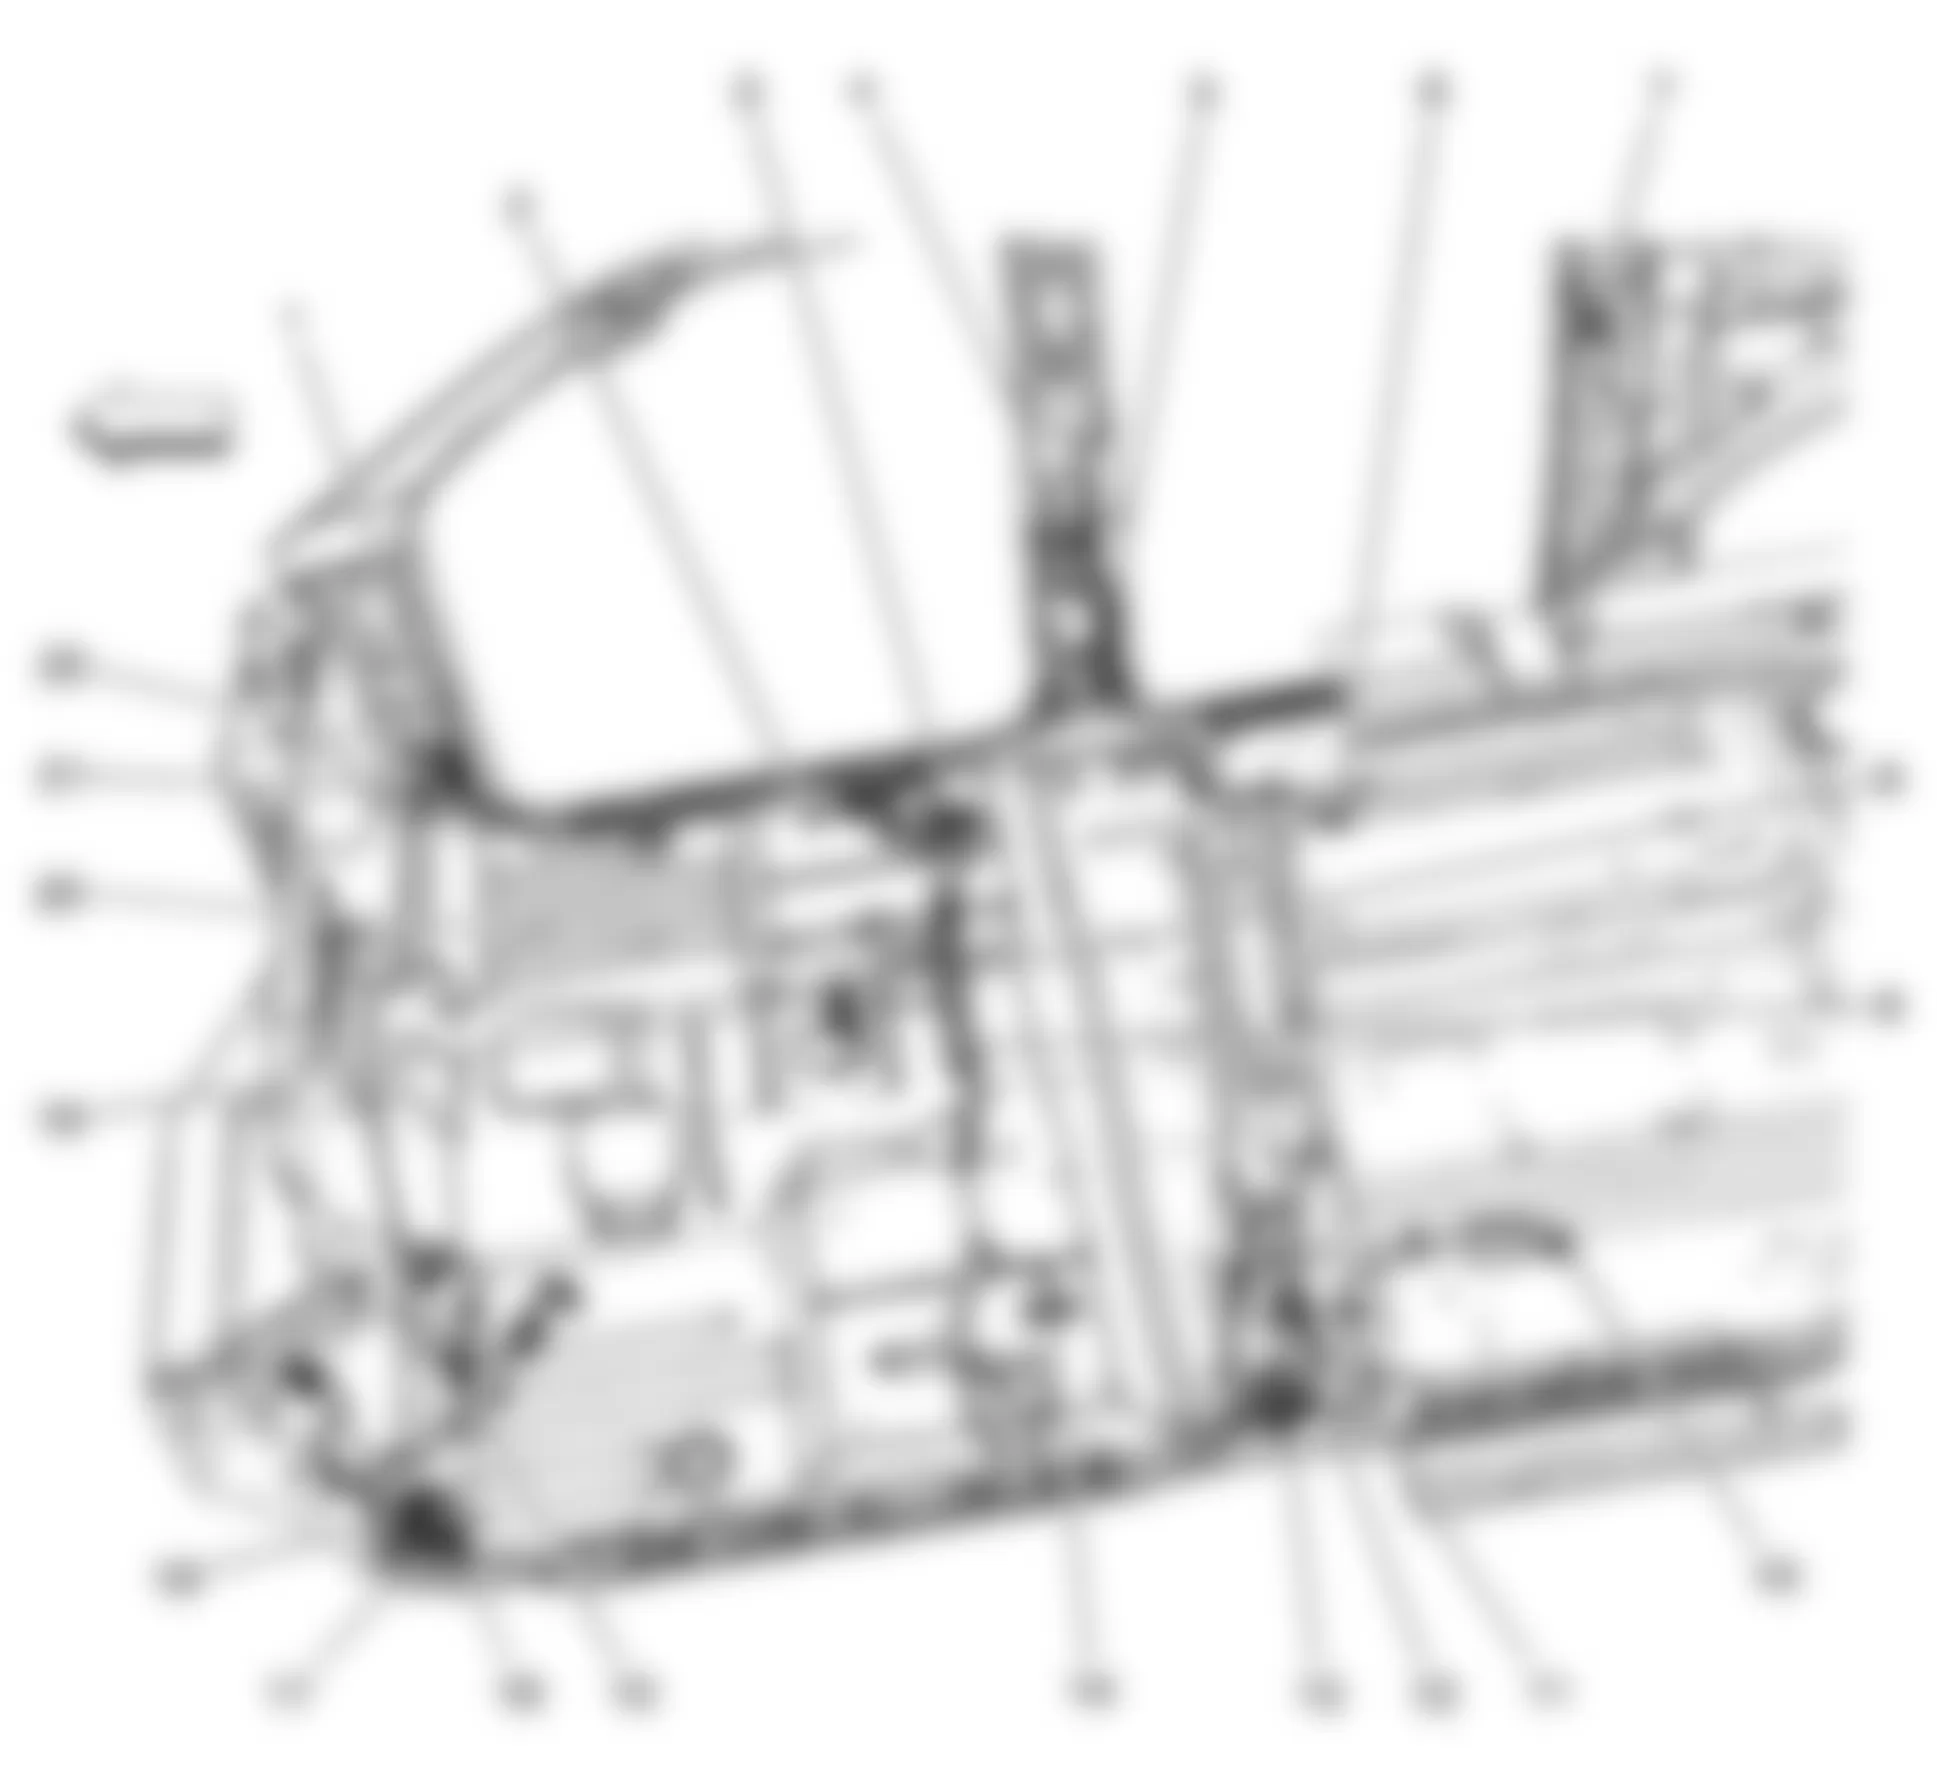 GMC Yukon 2008 - Component Locations -  Front Passenger Compartment (Long Wheel Base)